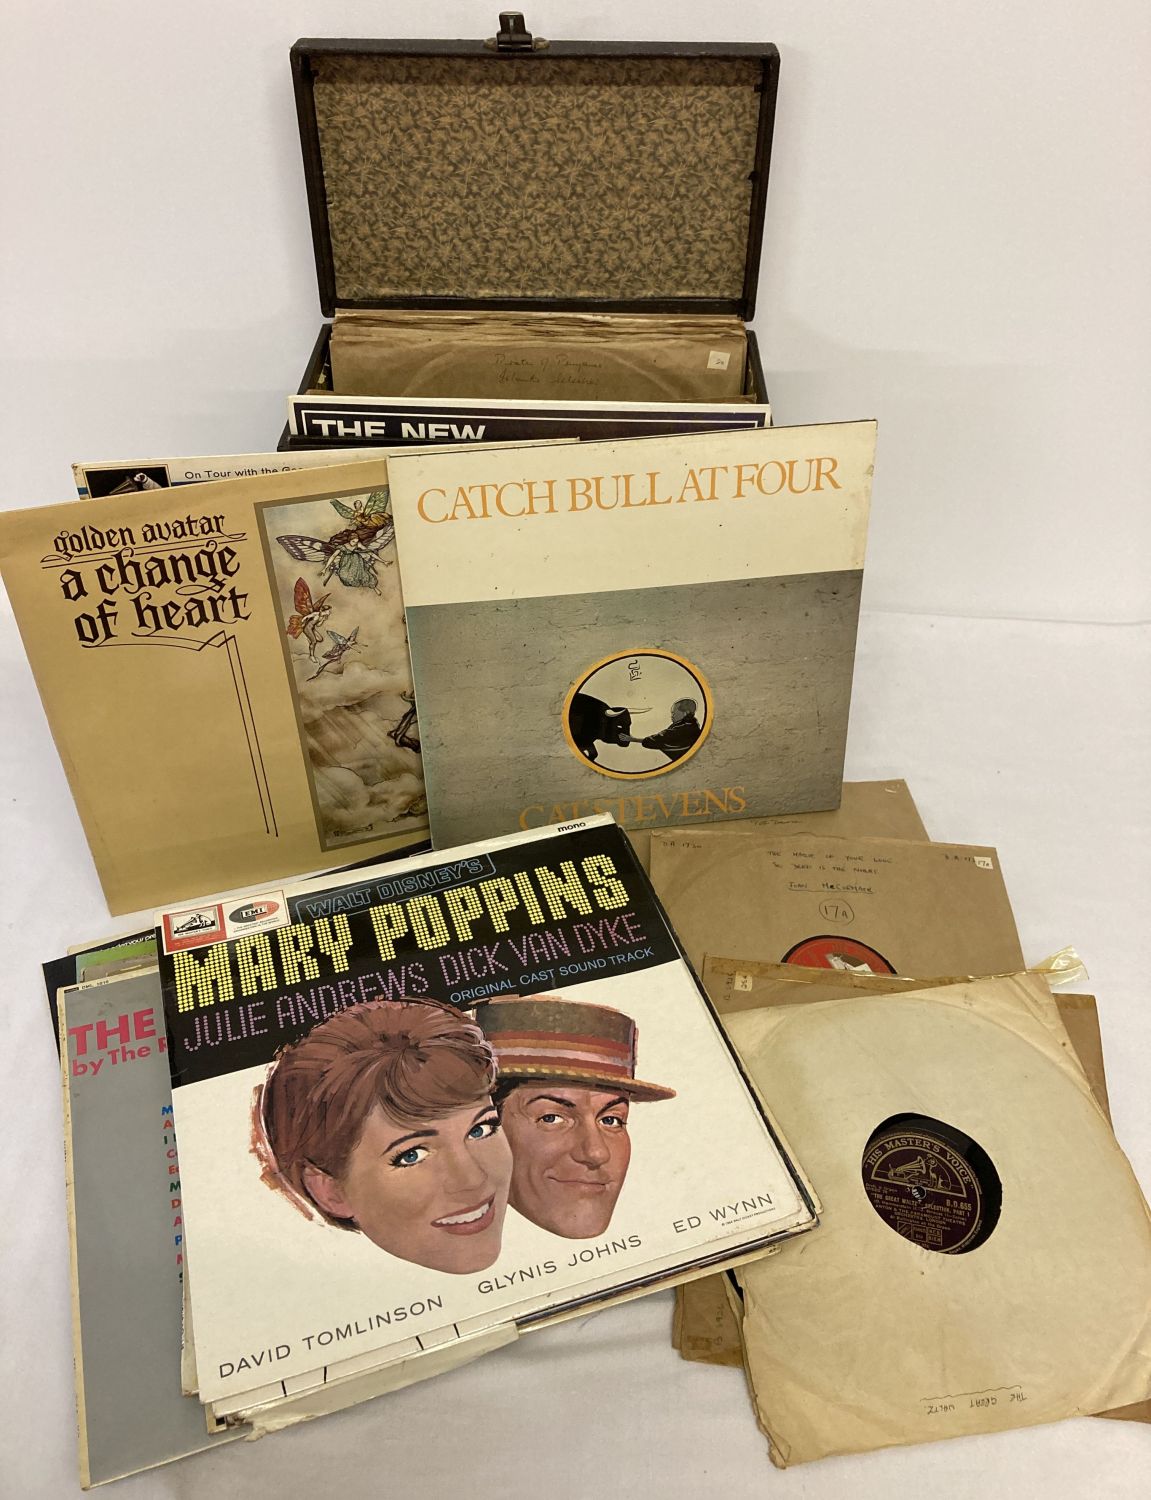 A vintage record carry case containing a collection of 78 records.